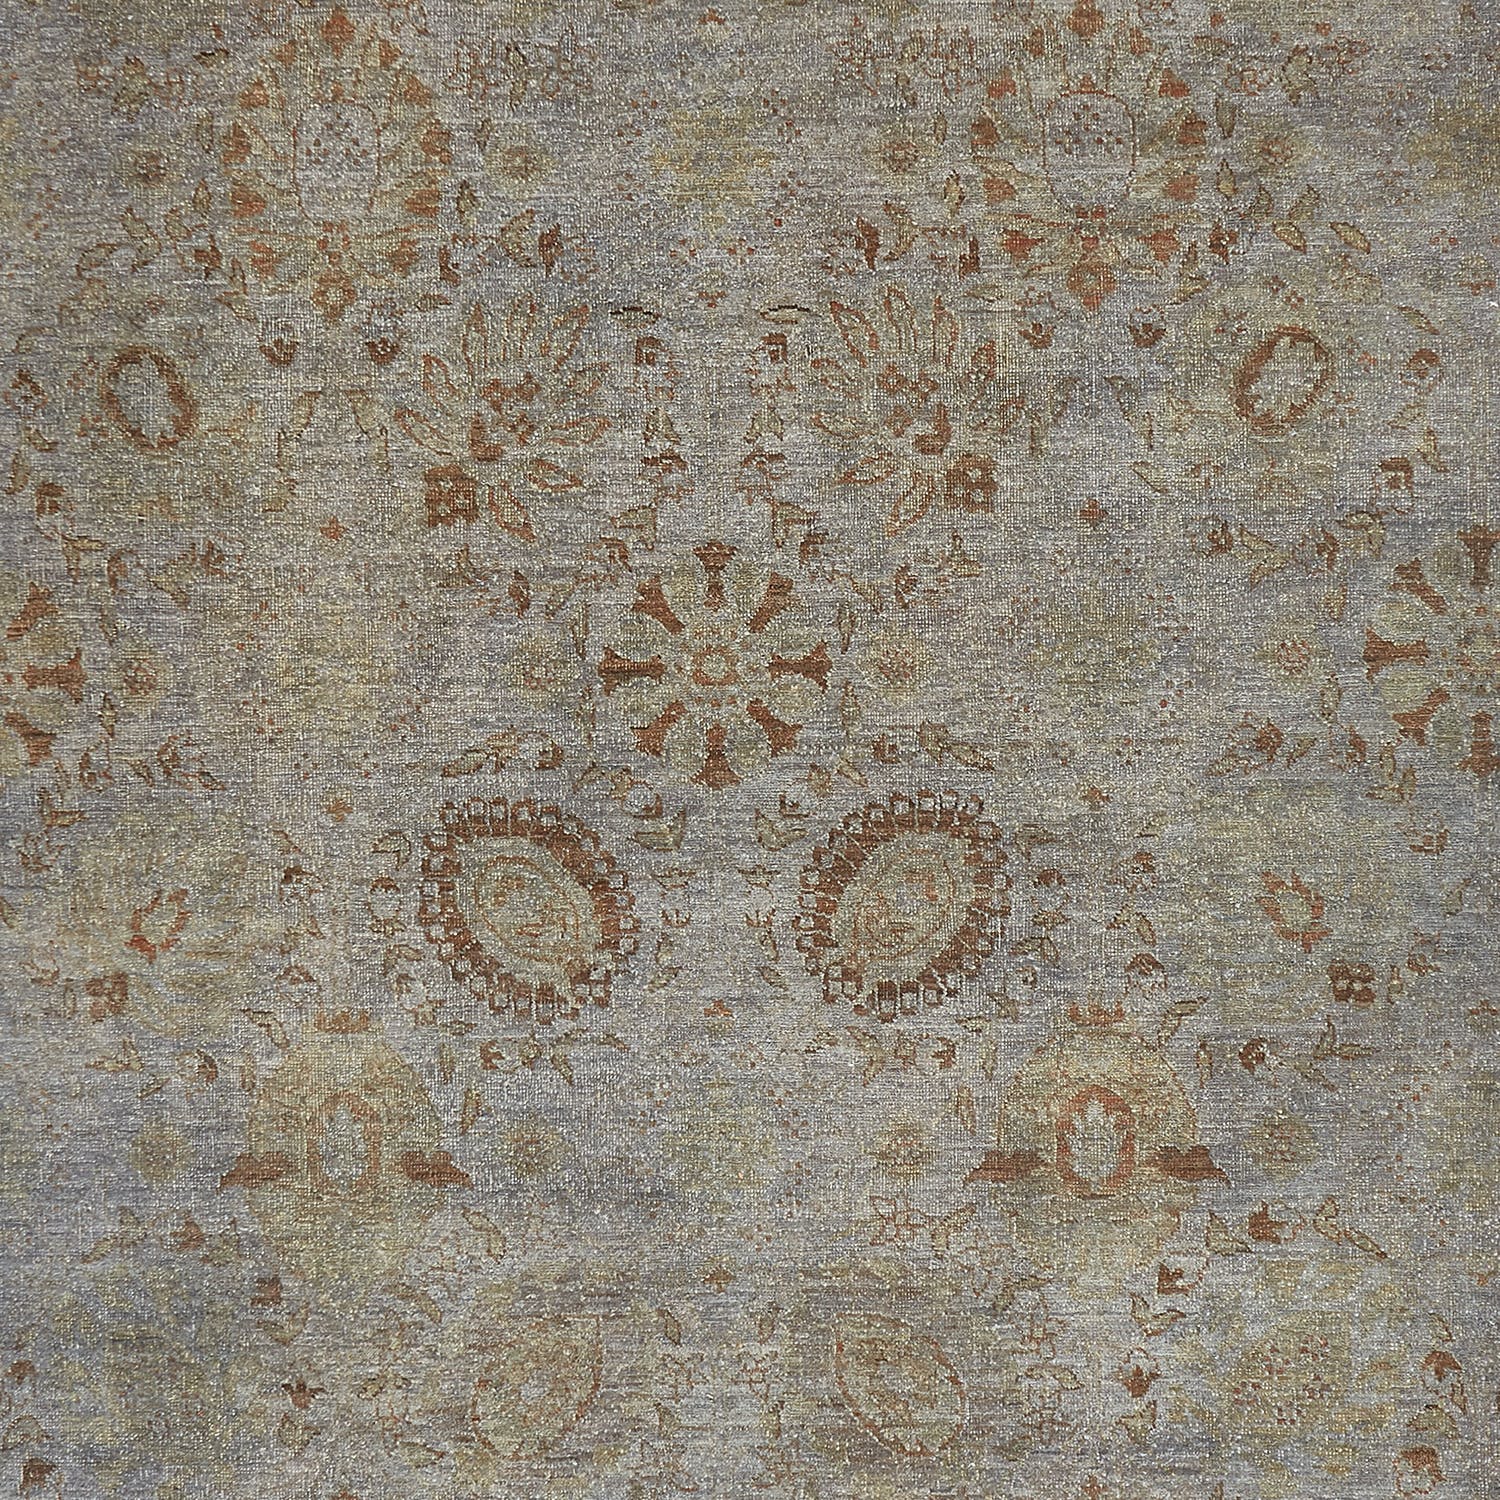 Patterned fabric with decorative motifs in warm earth tones on gray background.